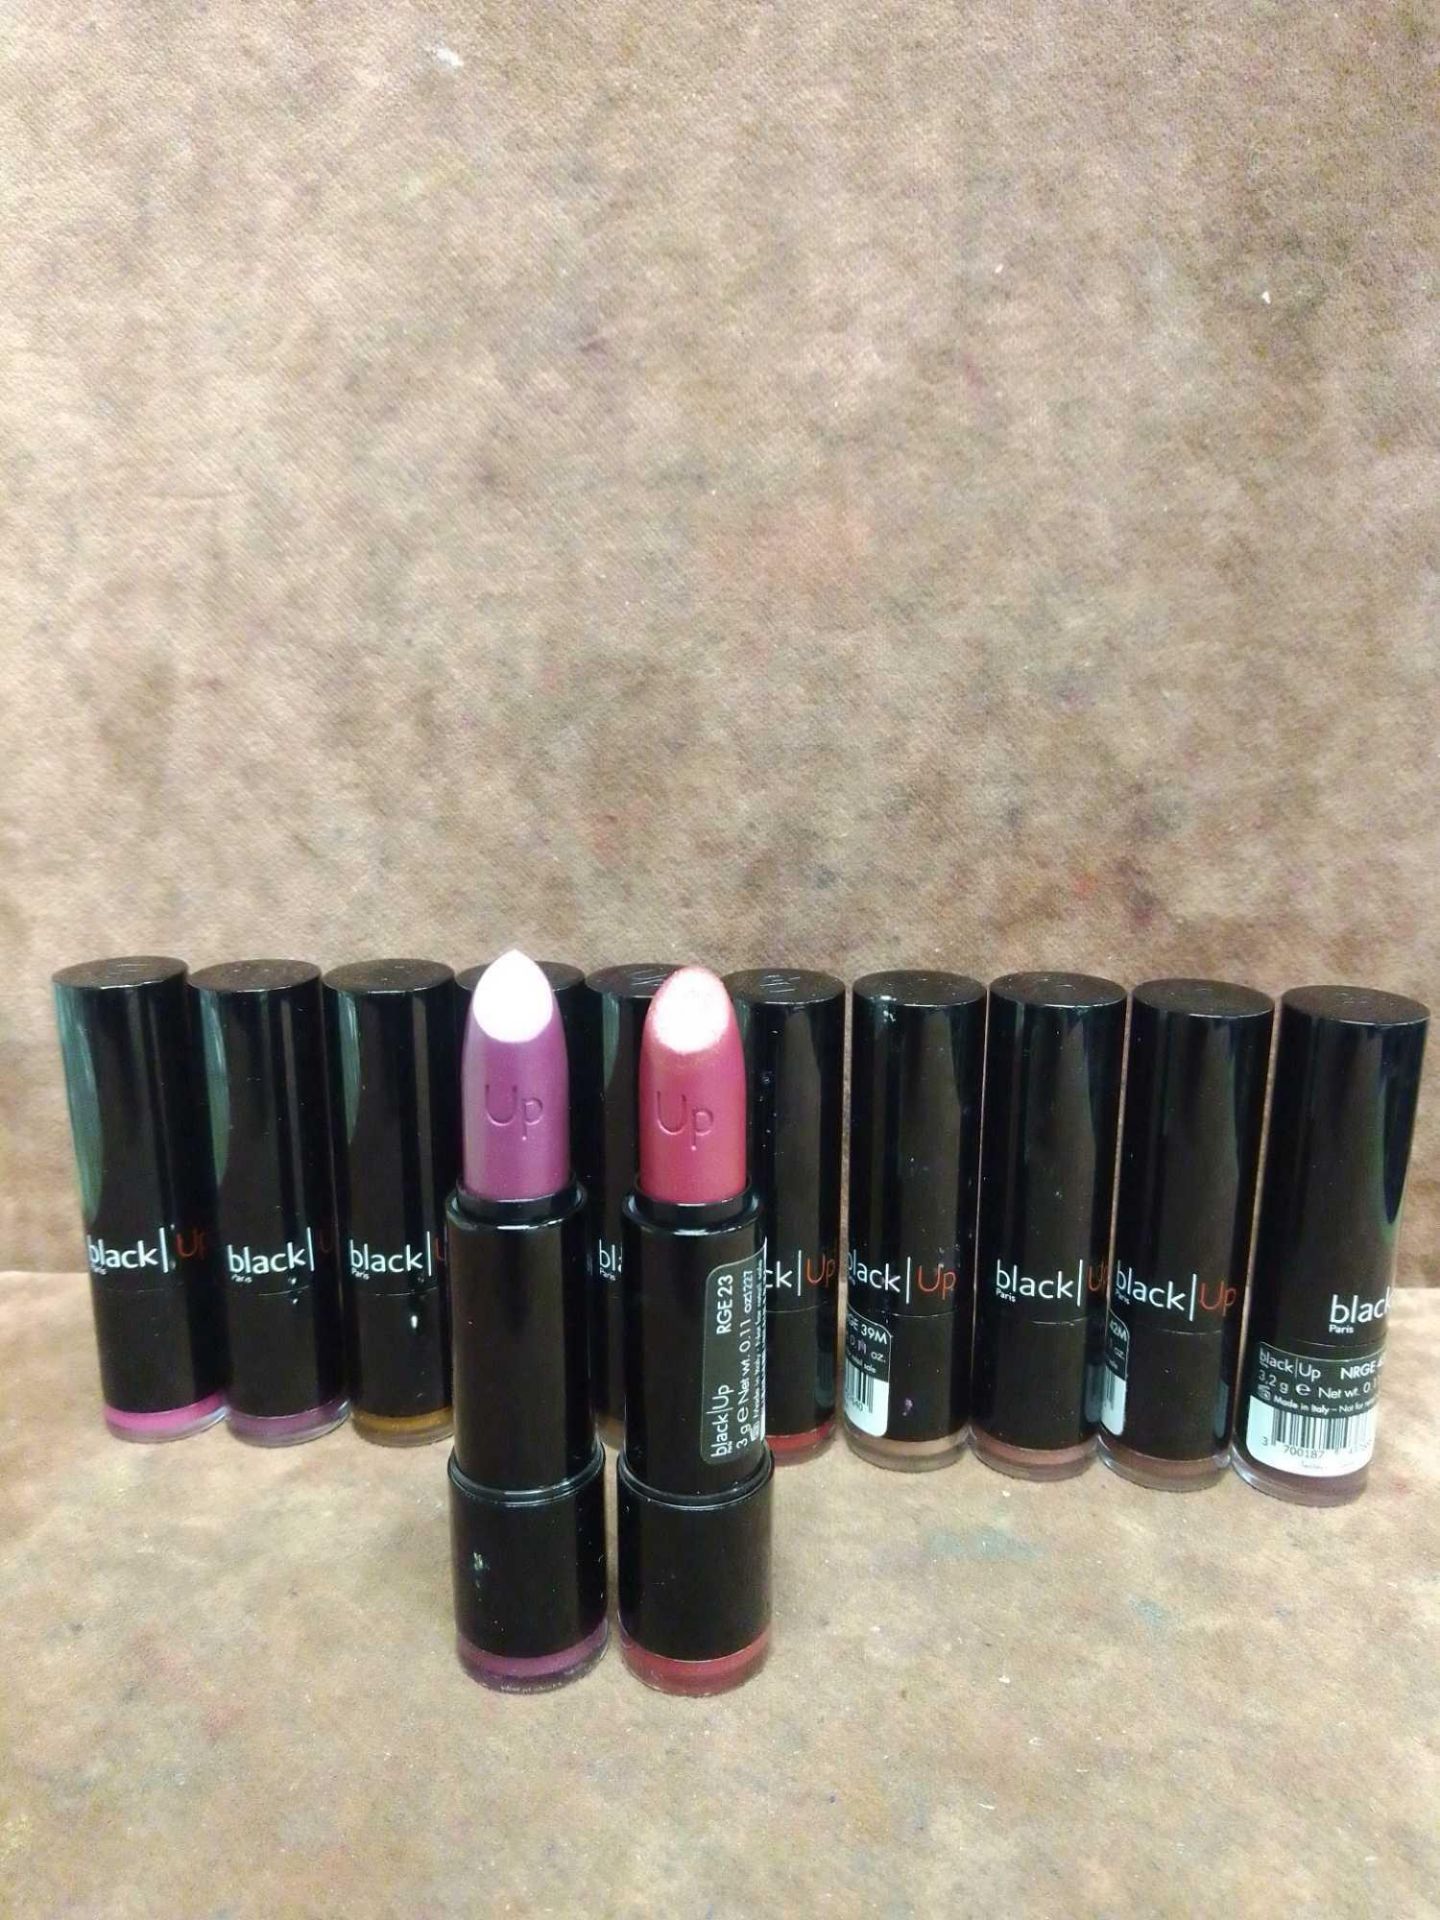 (Jb) RRP £200 Lot To Contain 12 Testers Of Black Up Paris Lipsticks In Assorted Shades All Ex-Displa